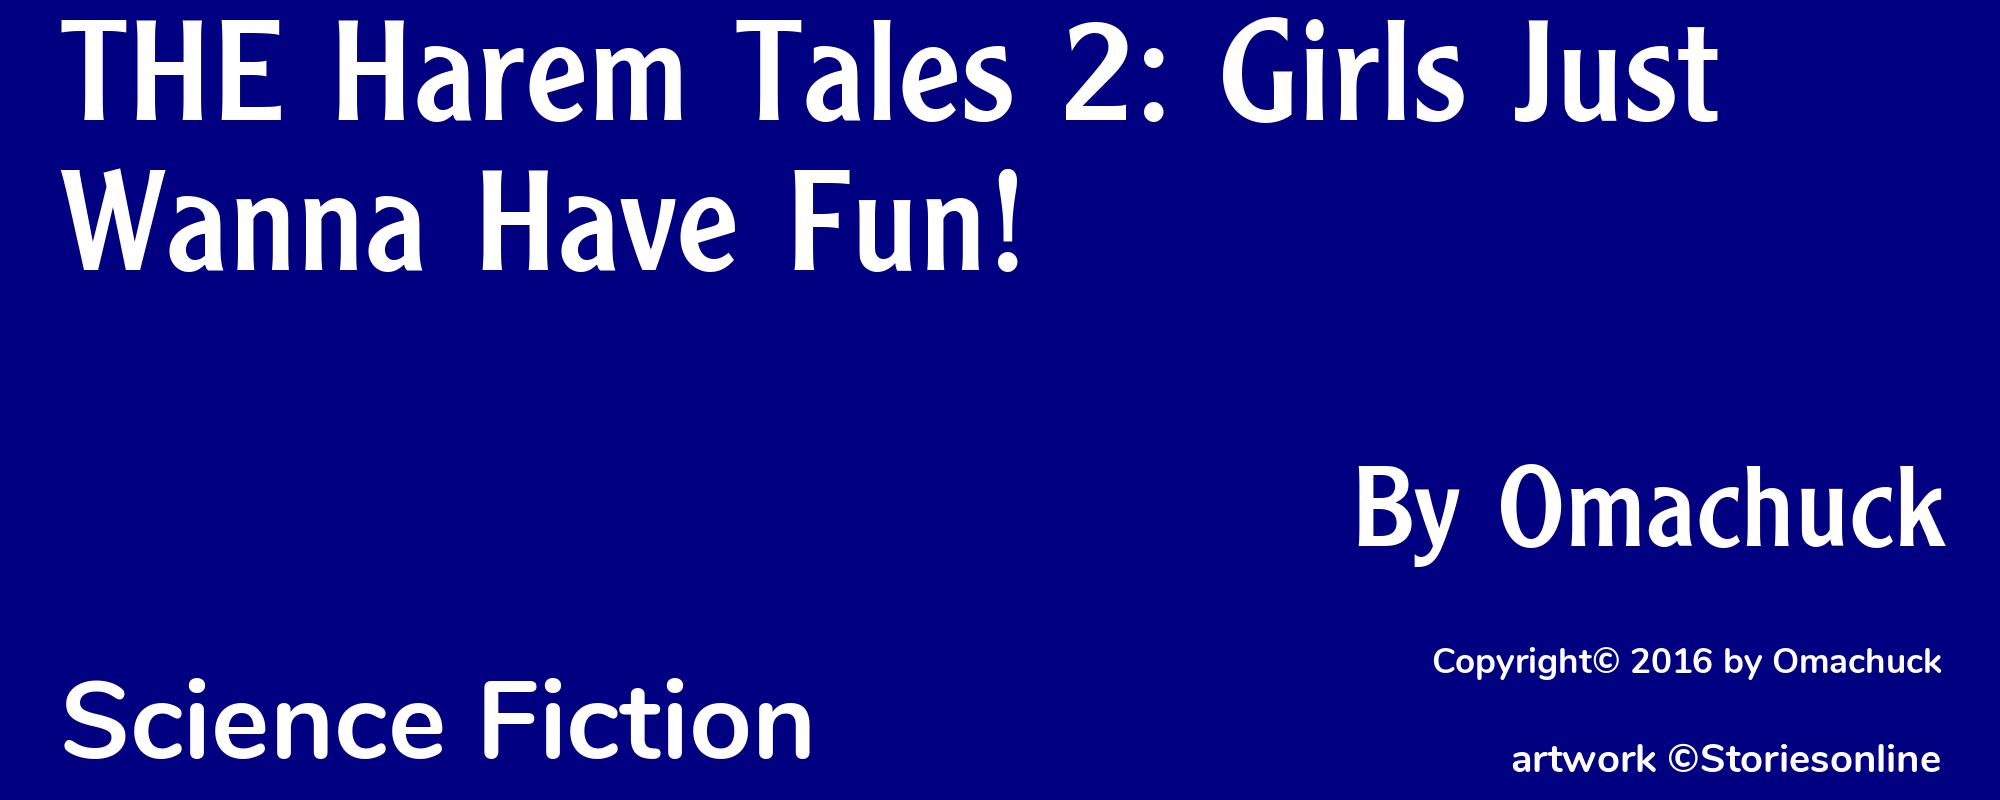 THE Harem Tales 2: Girls Just Wanna Have Fun! - Cover